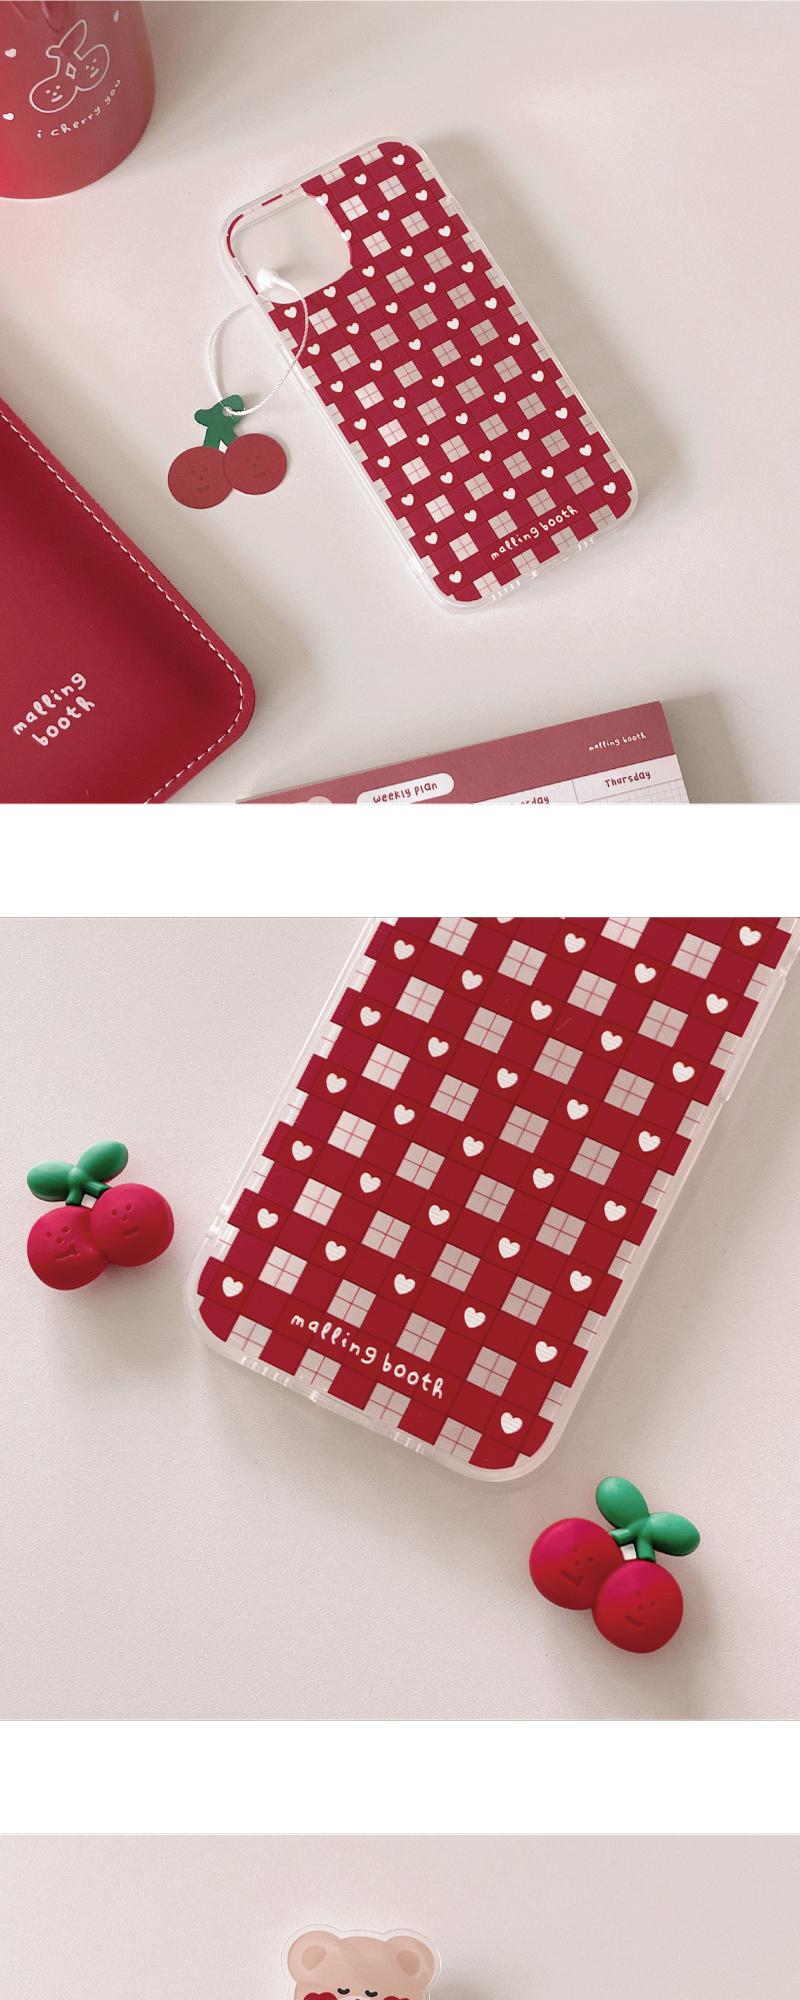 red libe smartphone case